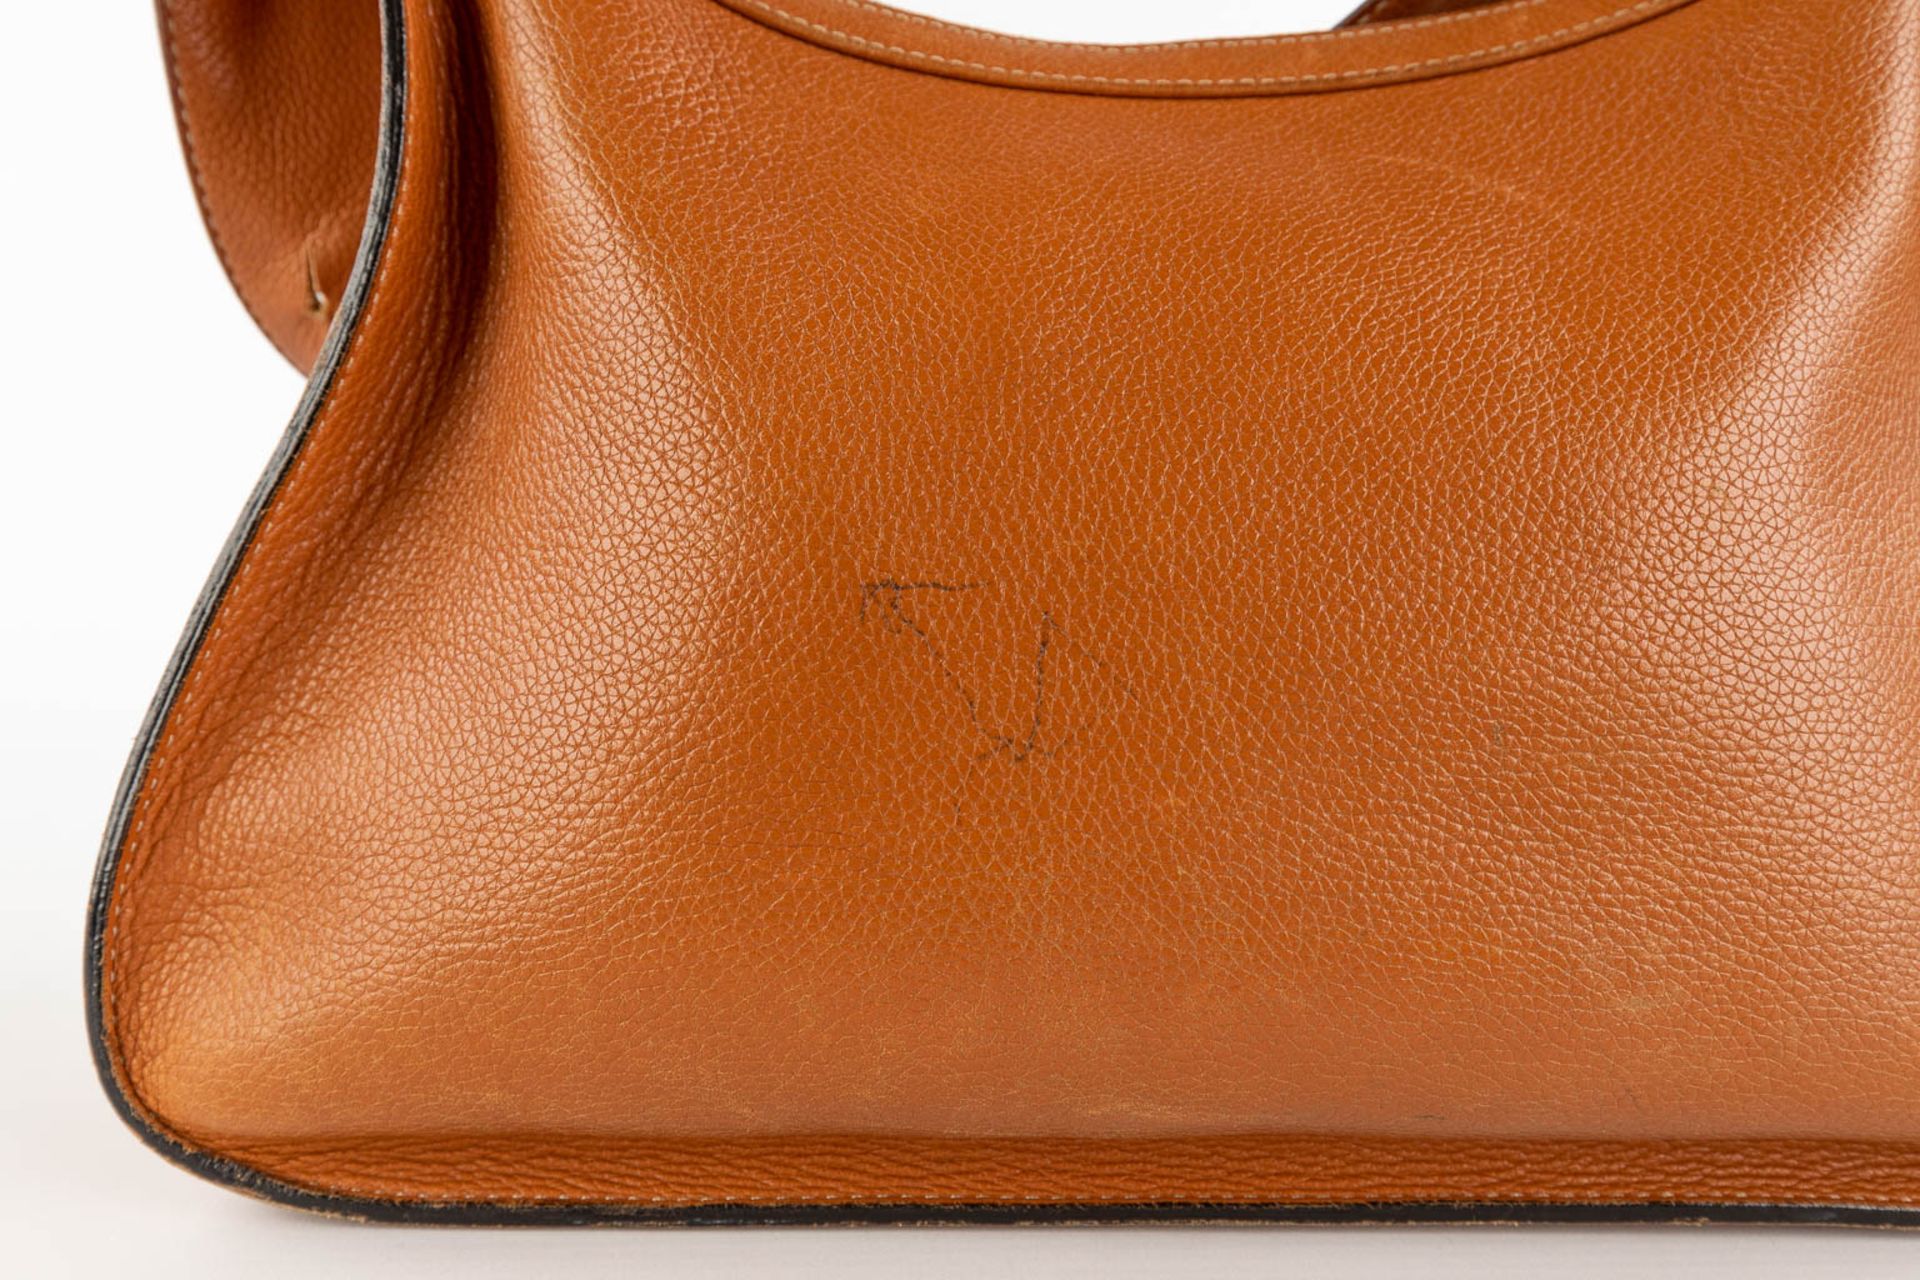 Delvaux, Pensée, a handbag made of brown leather. (W:24 x H:32 cm) - Image 14 of 18